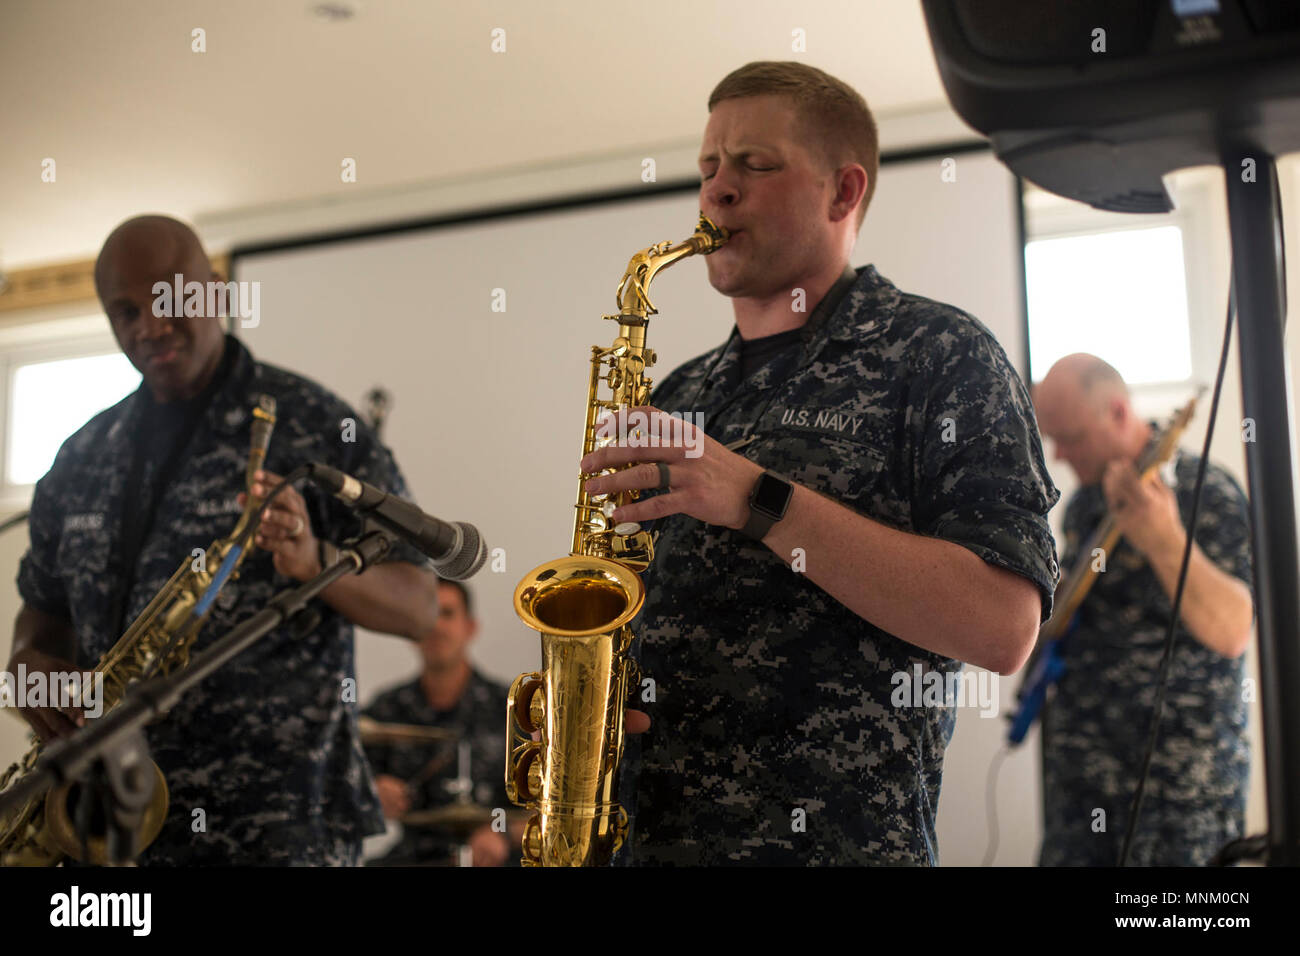 PUERTO CORTES, Honduras (March 17, 2018) Musician 3rd Class Kent Grover, of Idaho Falls, Idaho, plays the alto saxophone at the Centro de Comvenciones Omoa during Continuing Promise 2018. U.S. Naval Forces Southern Command/U.S. 4th Fleet has deployed a force to execute Continuing Promise to conduct civil-military operations including humanitarian assistance, training engagements, and medical, dental, and veterinary support in an effort to show U.S. support and commitment to Central and South America. Stock Photo